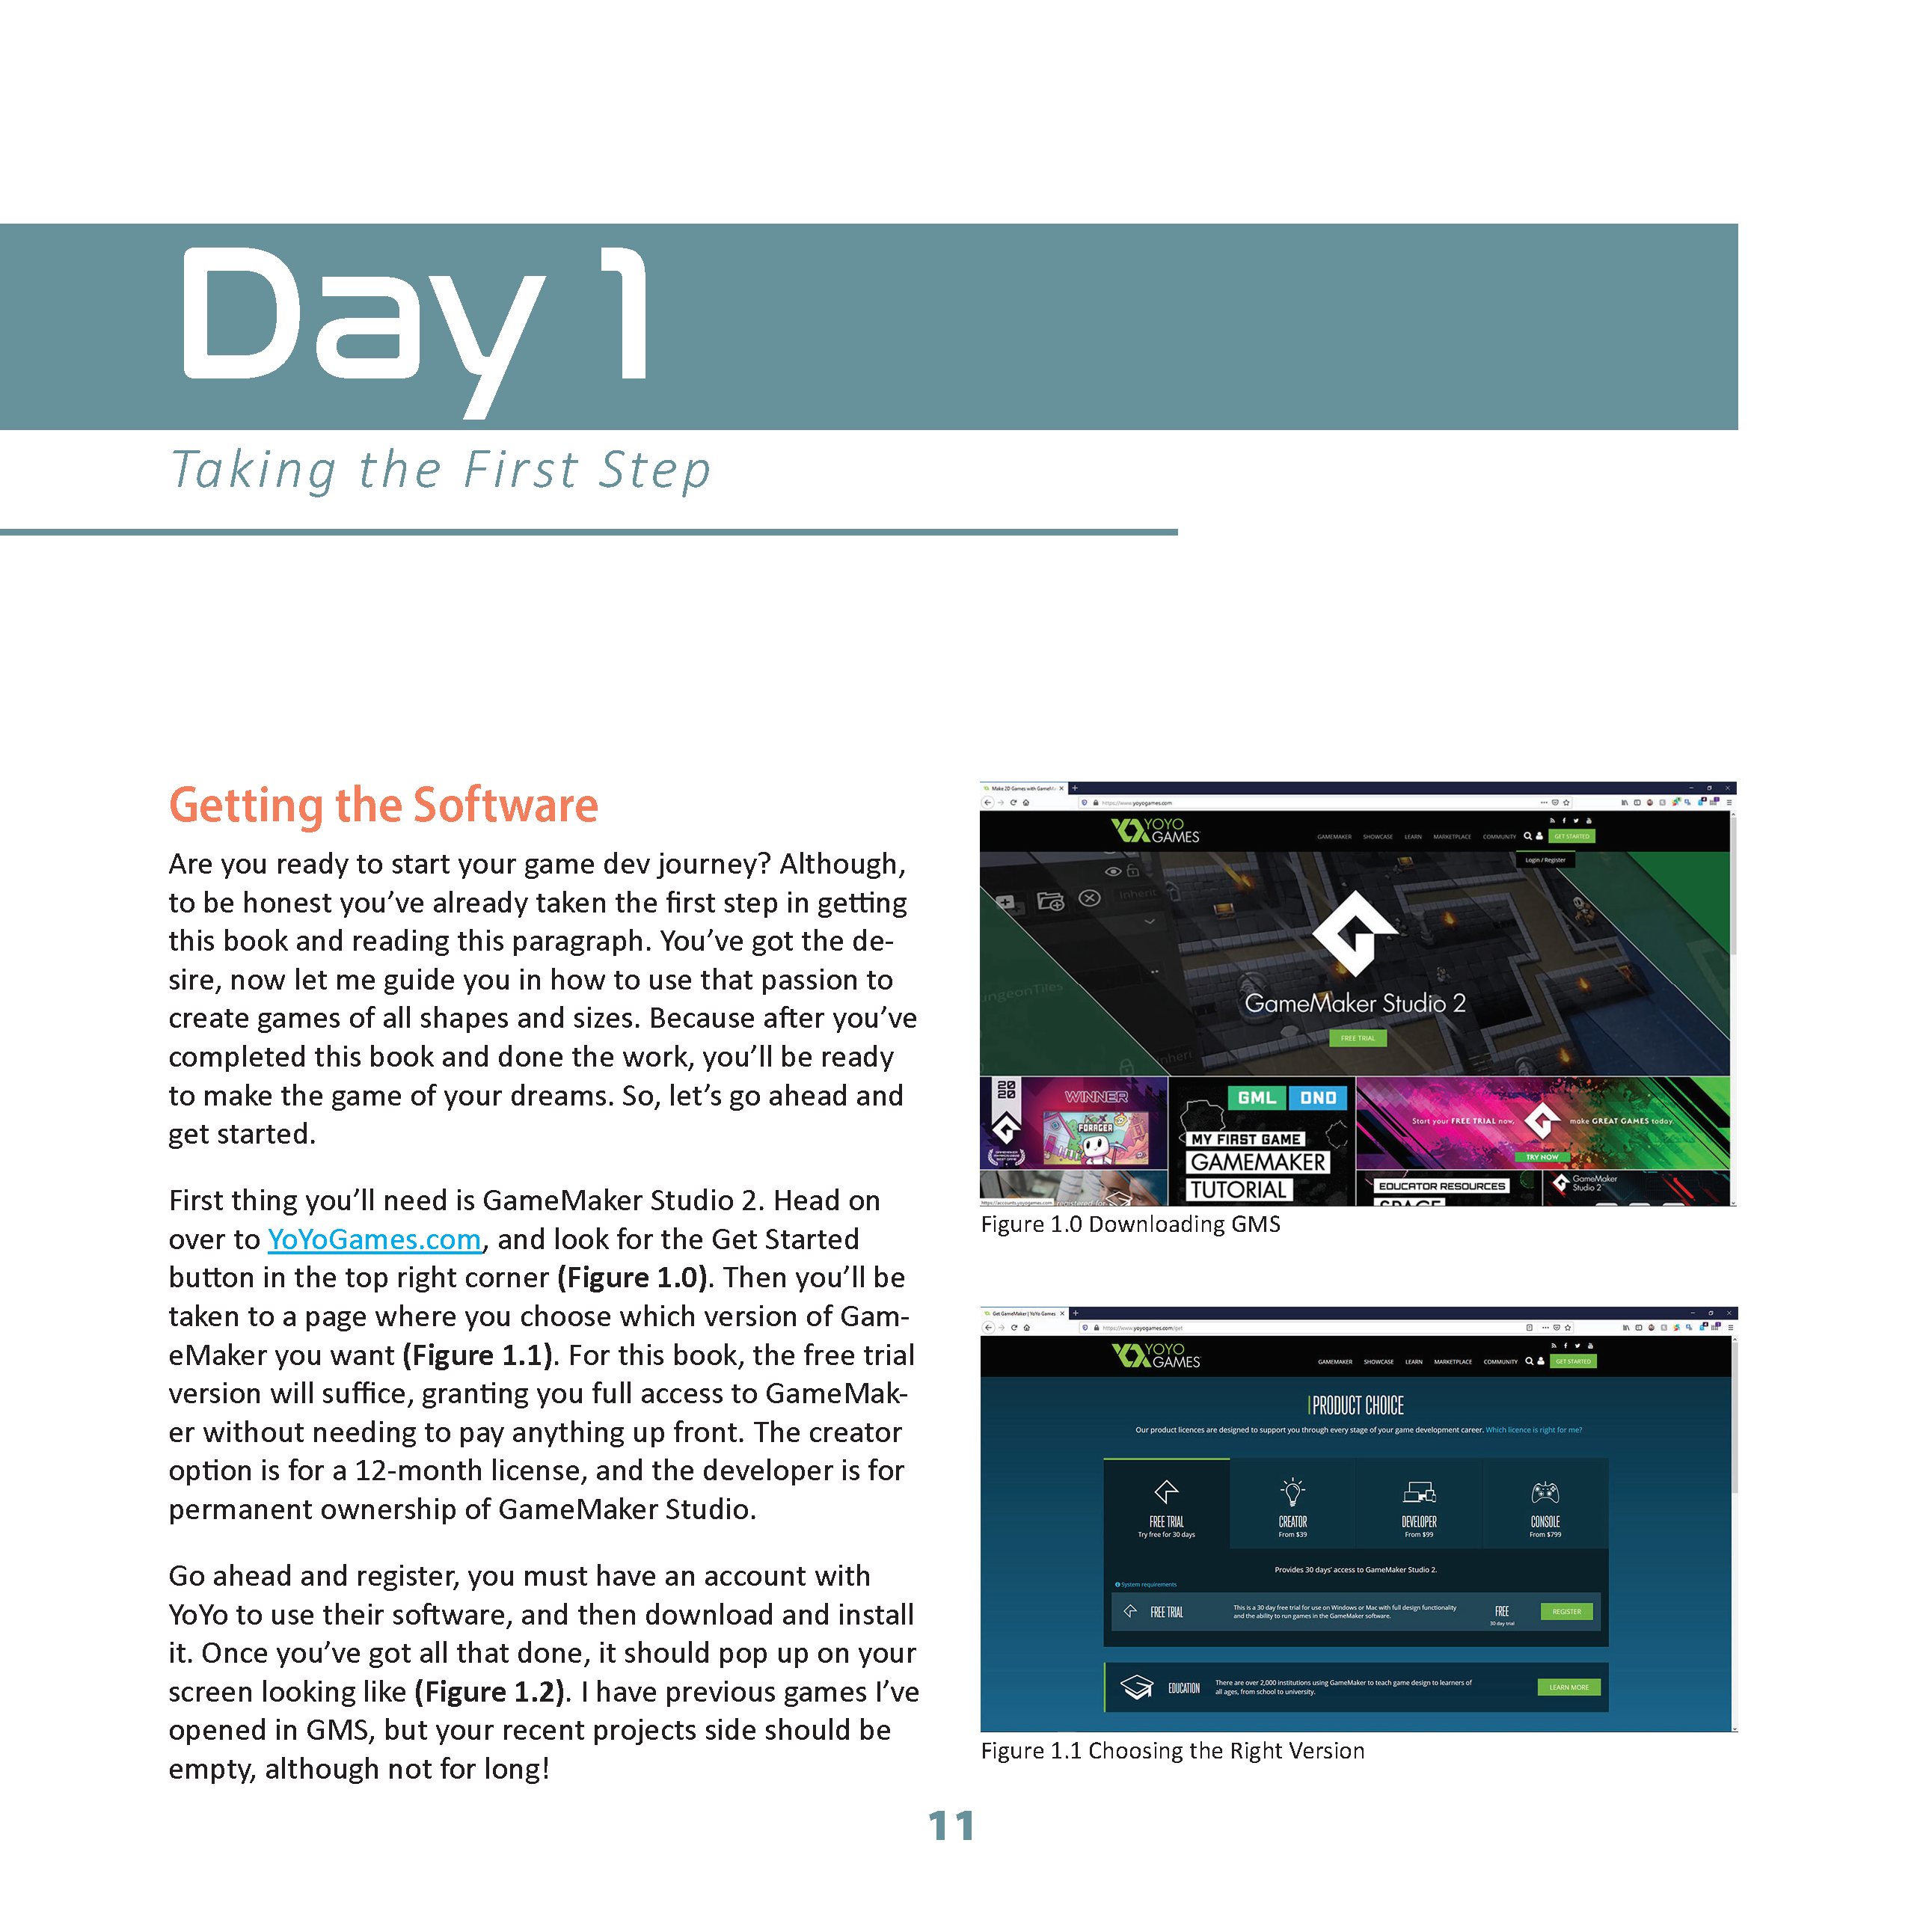 A day in the life of a game developer (Free) by Tasstudent